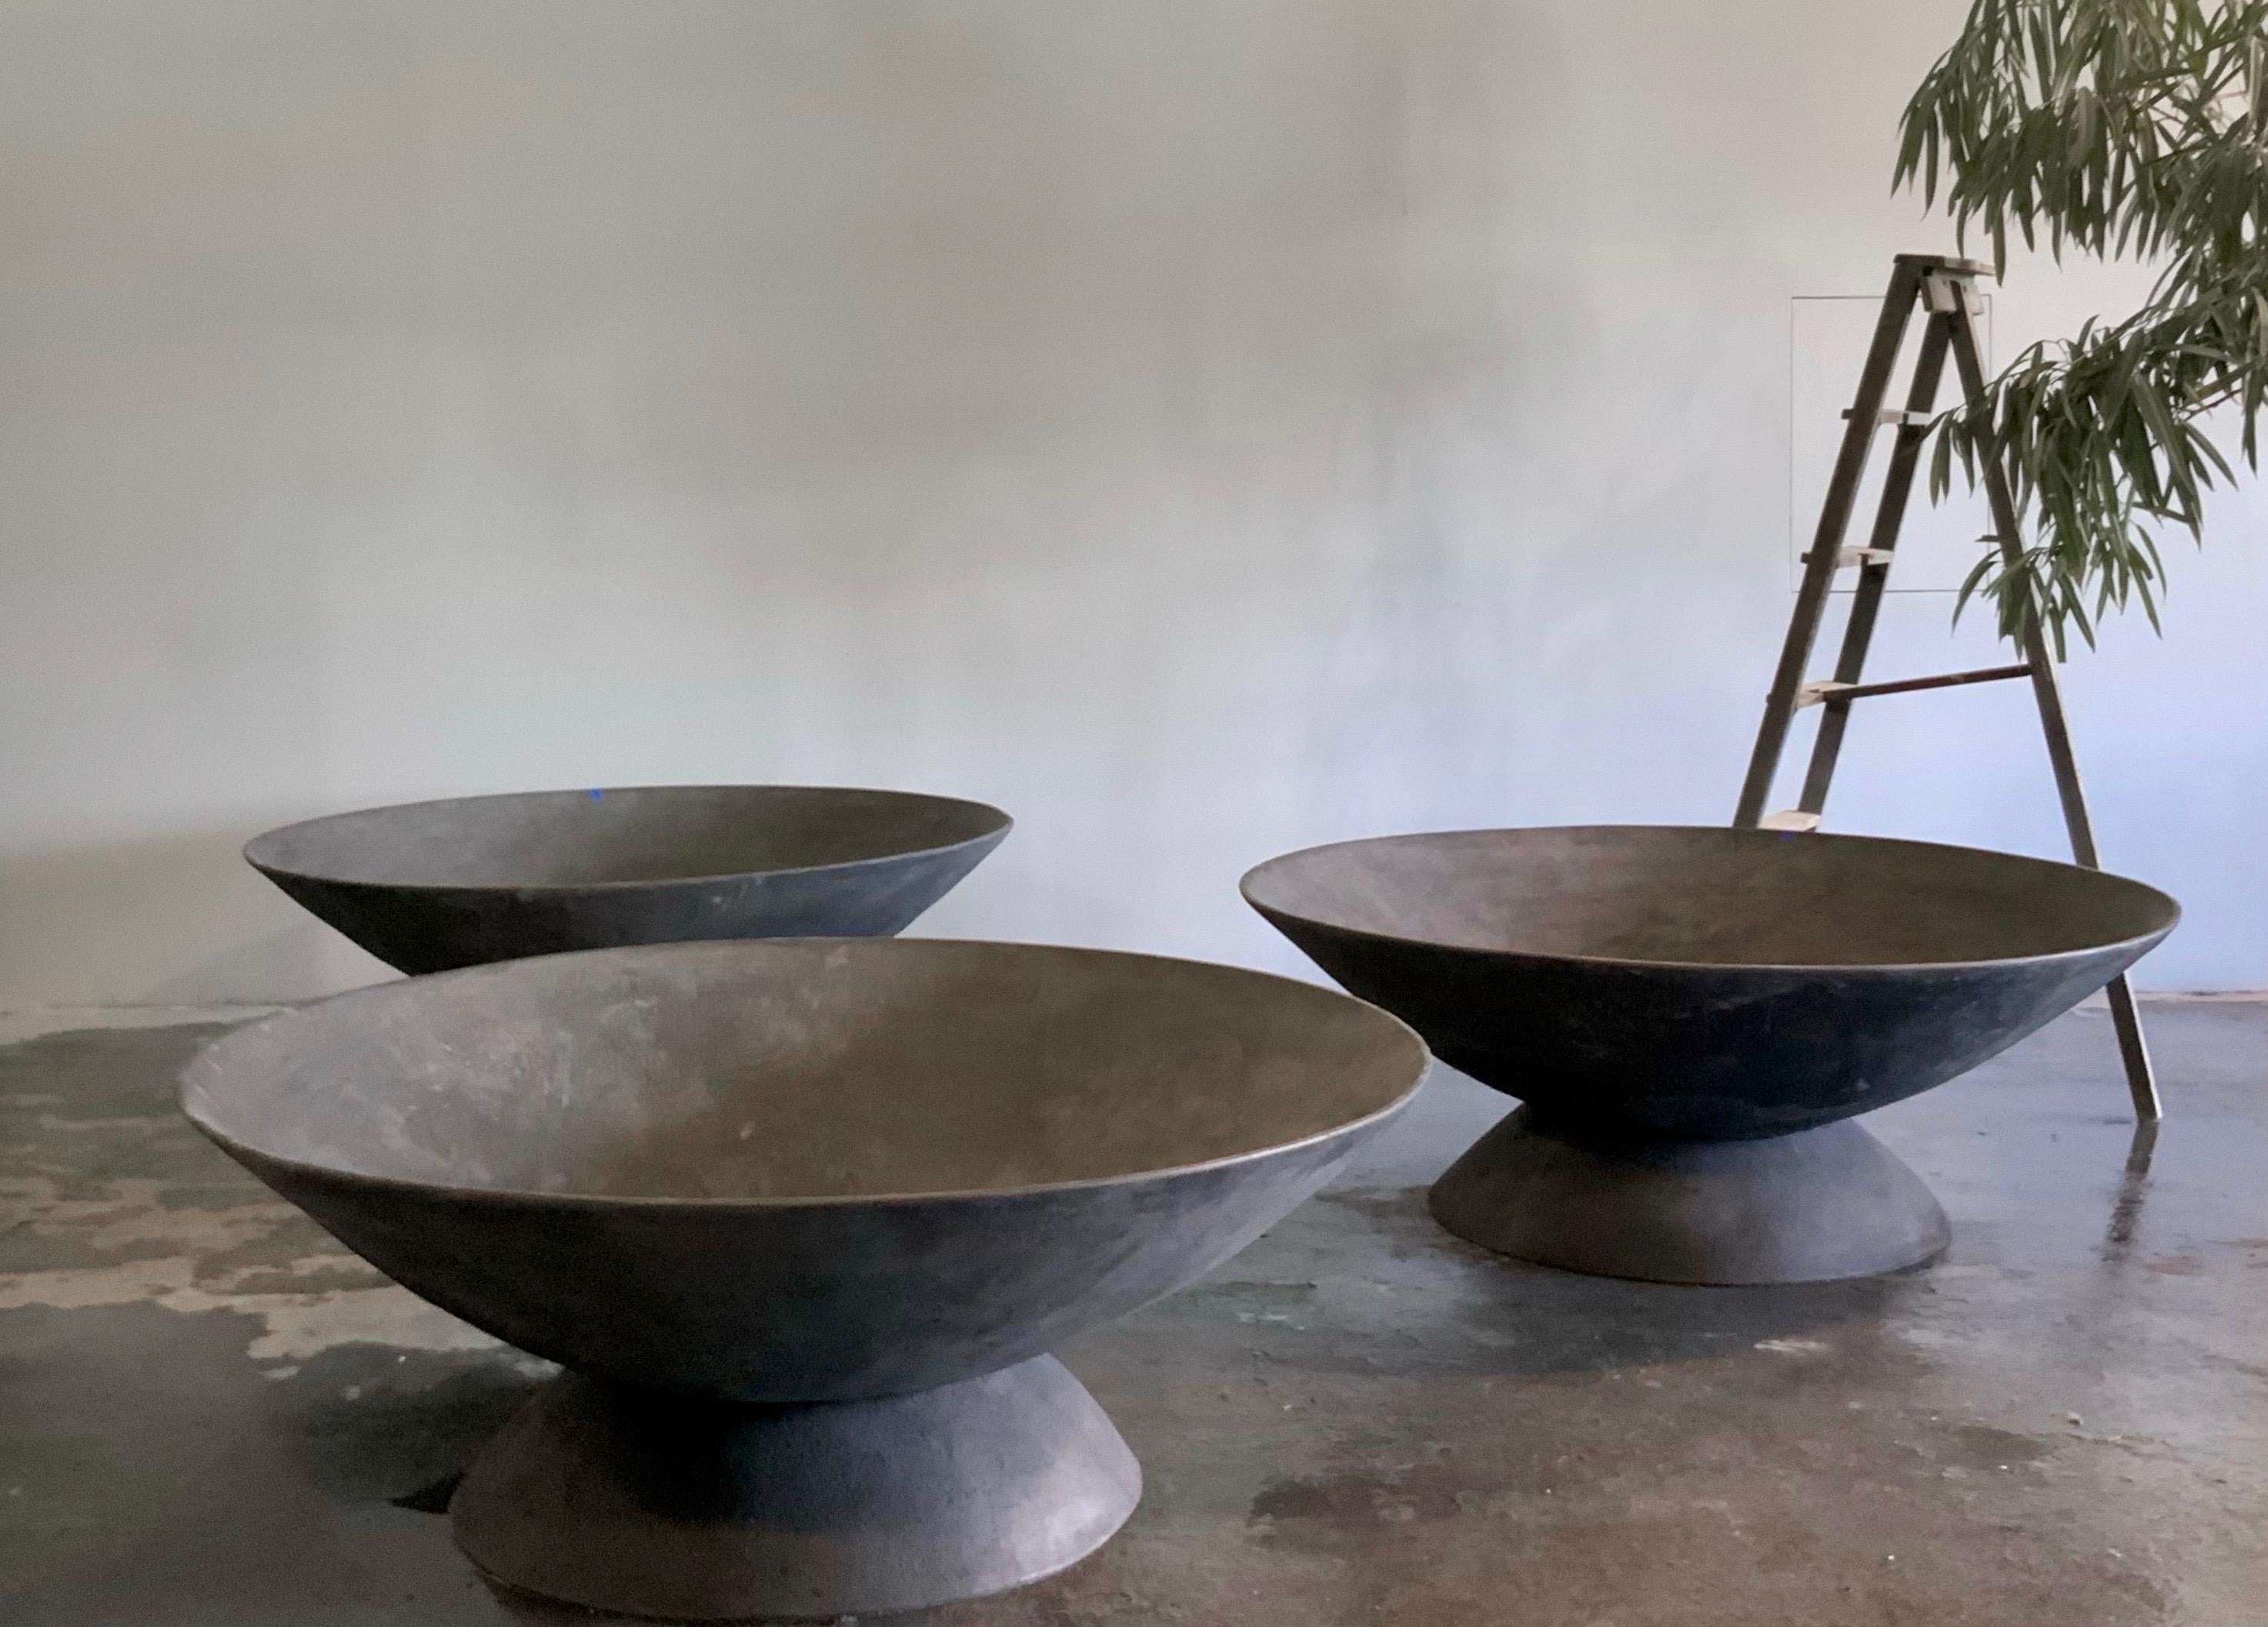 Ukiyo Saucer, Concrete Fountain/Fishpond by OPIARY (D62